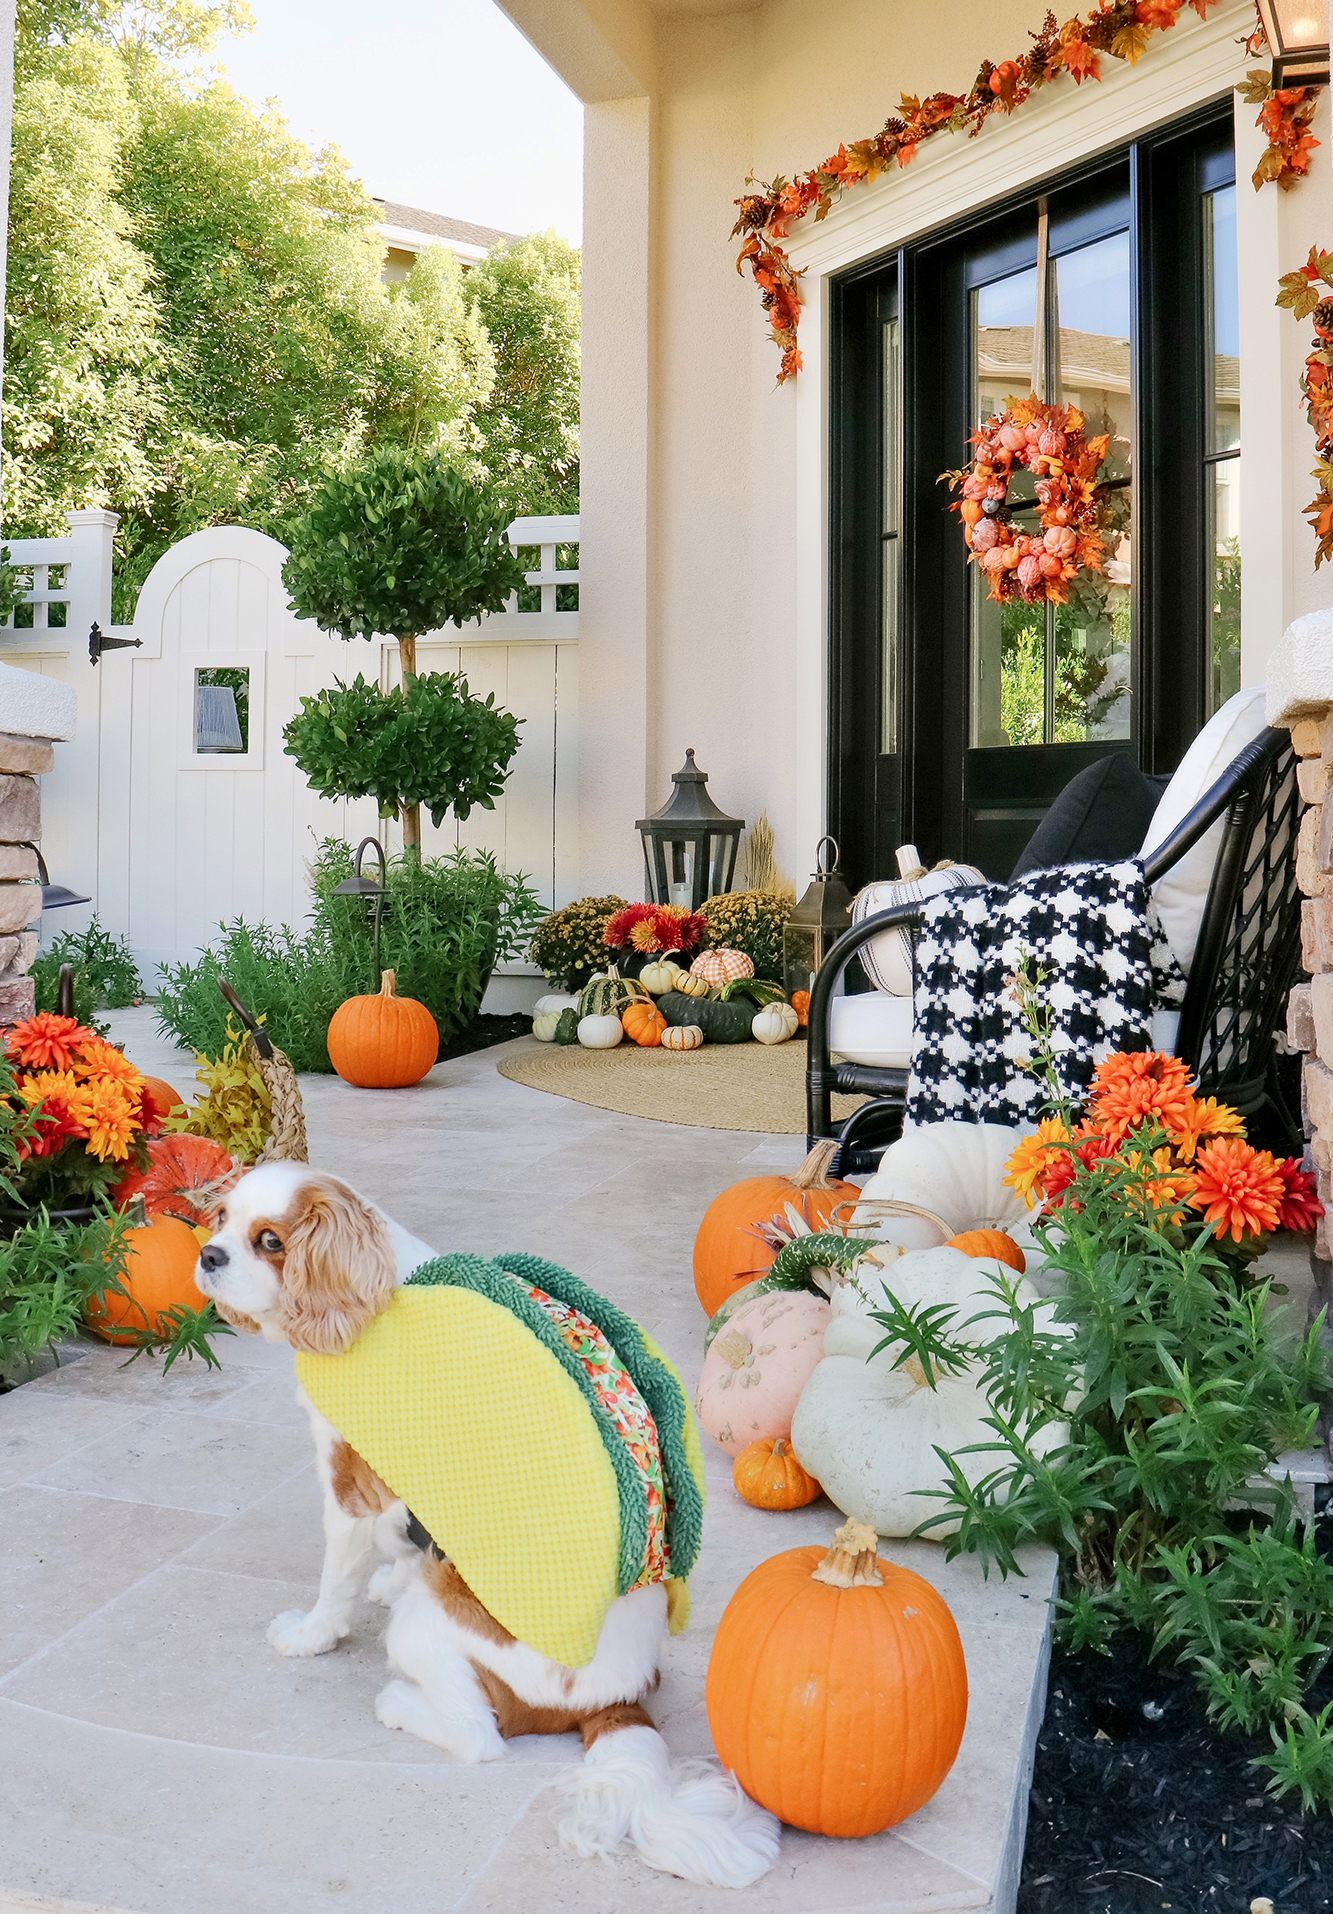 Affordable Pet Halloween Costumes & The Best Halloween Candy. We rounded up the cutest dog Halloween costumes that are under $8!